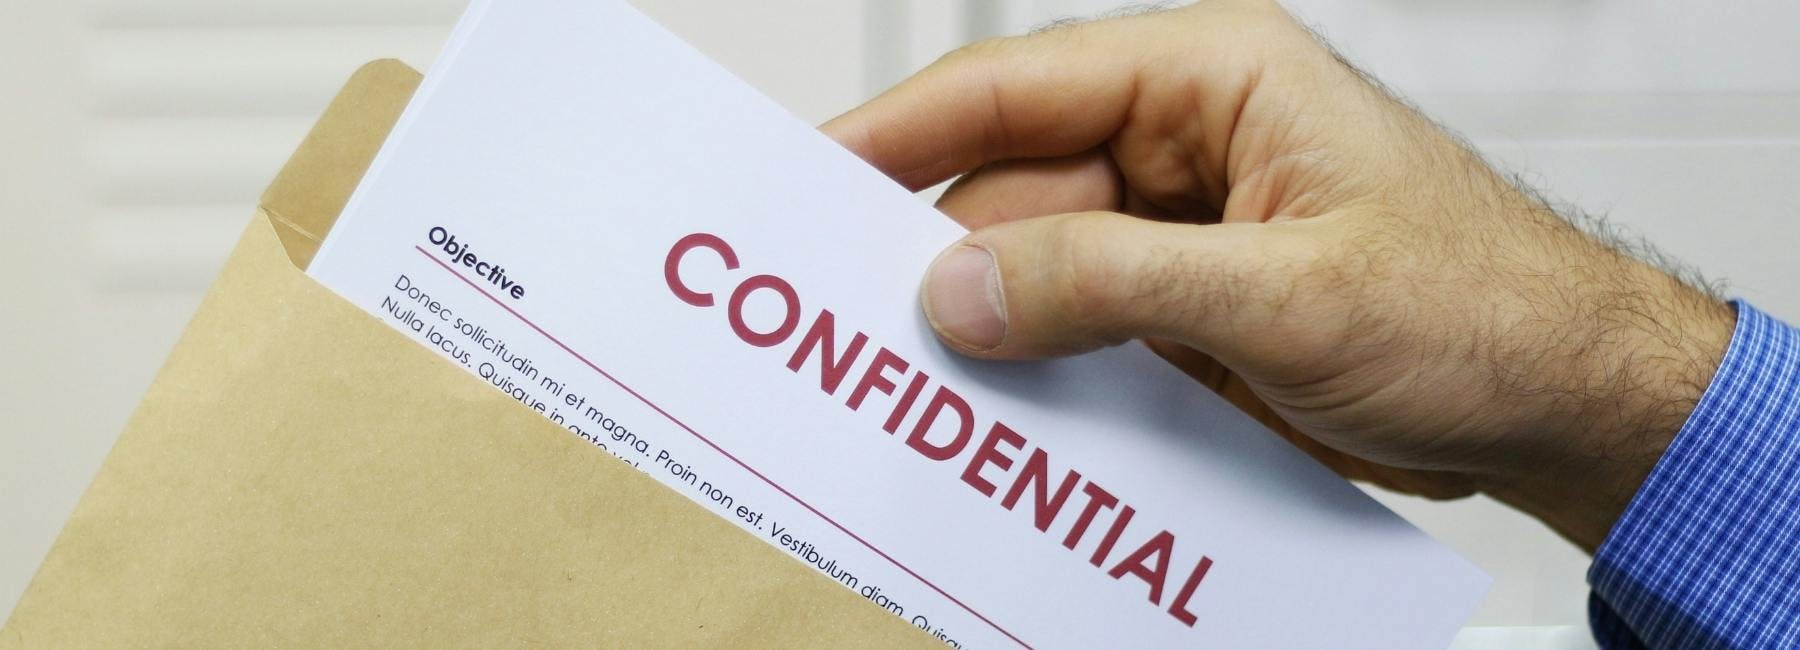 man pulling a paper out of an envelope that says confidential